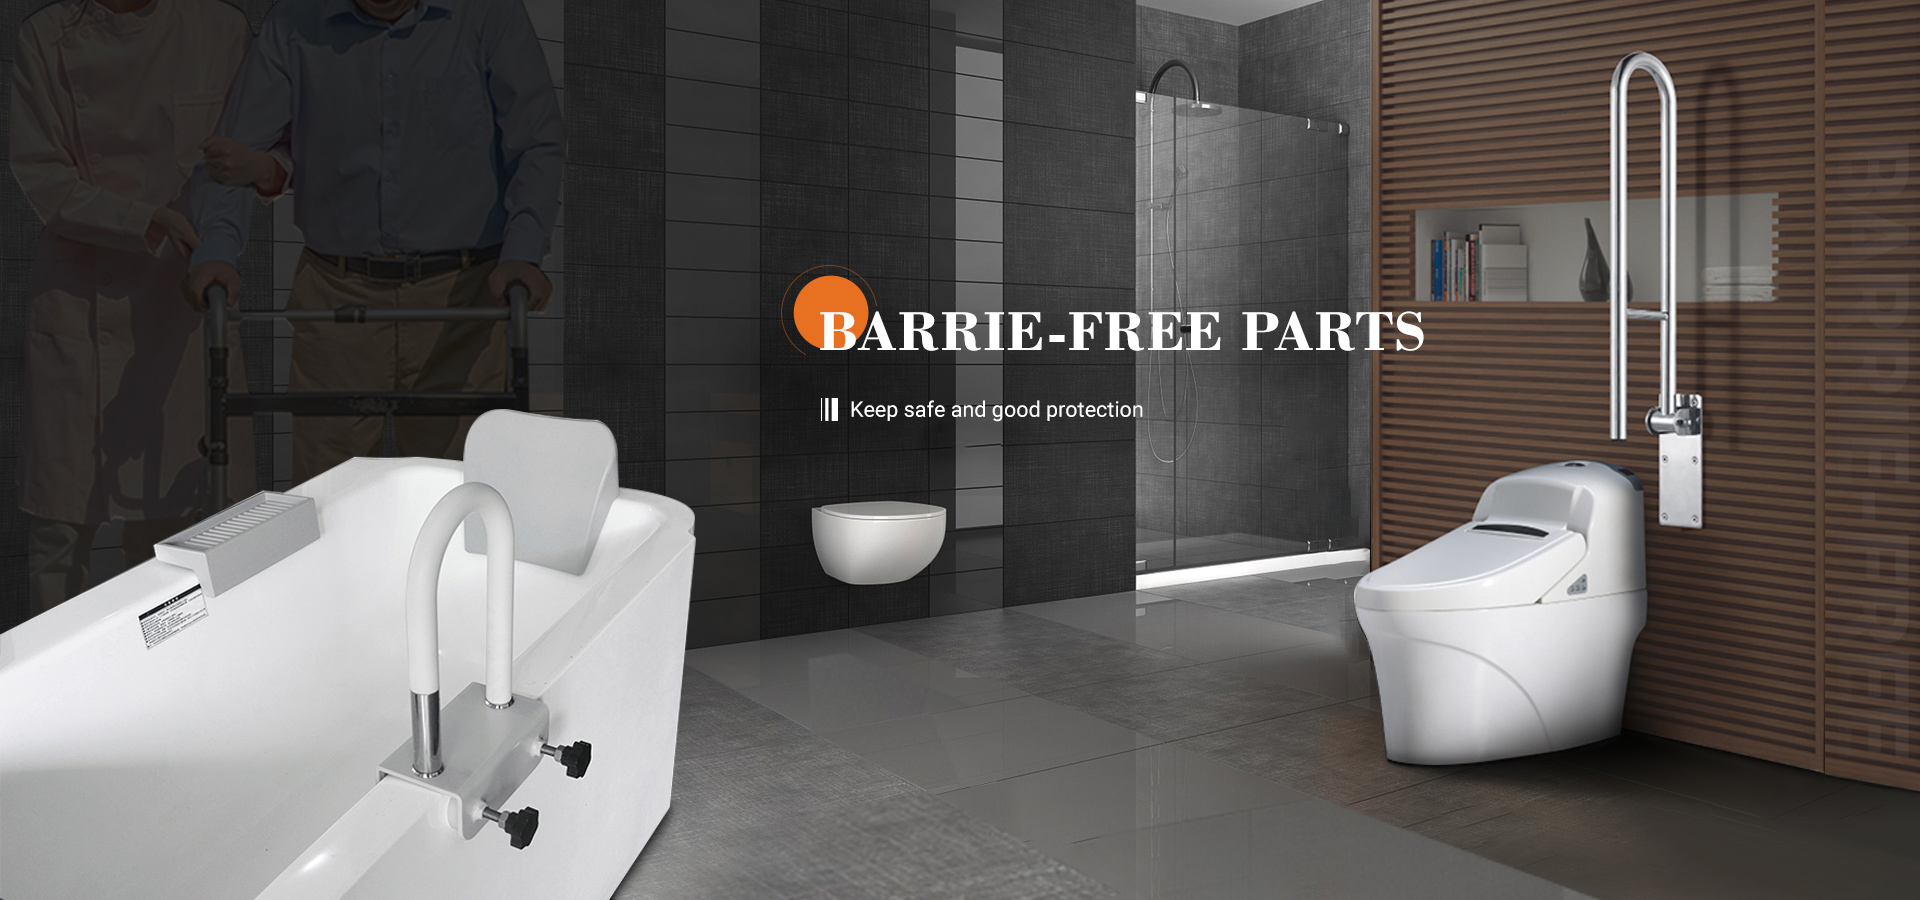 Barrie-Free Parts